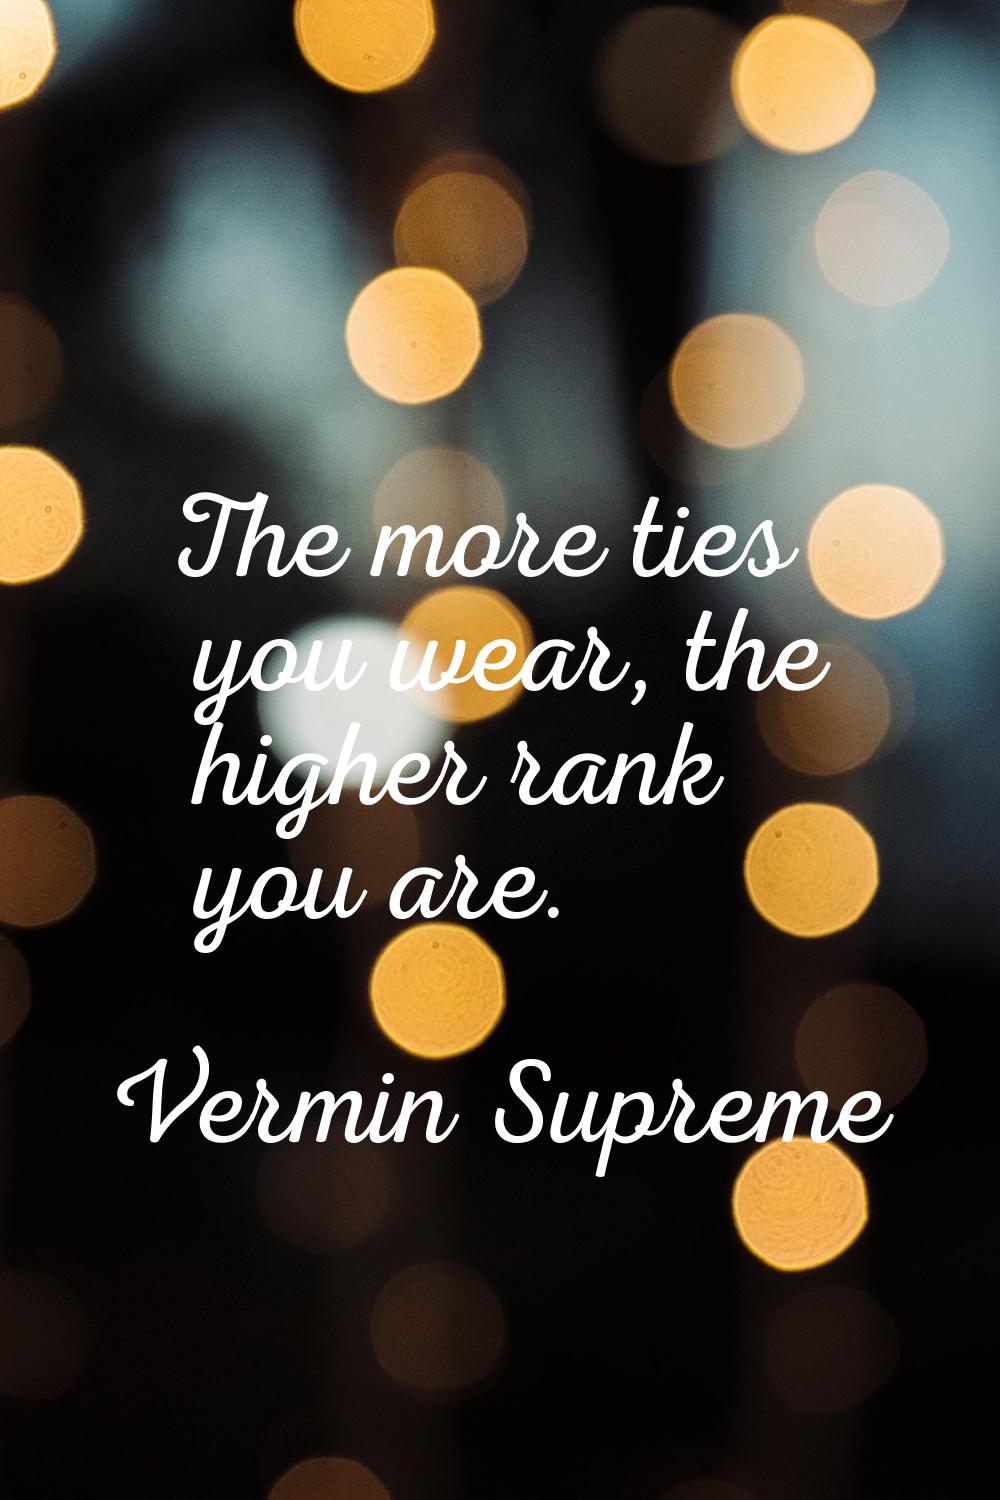 The more ties you wear, the higher rank you are.